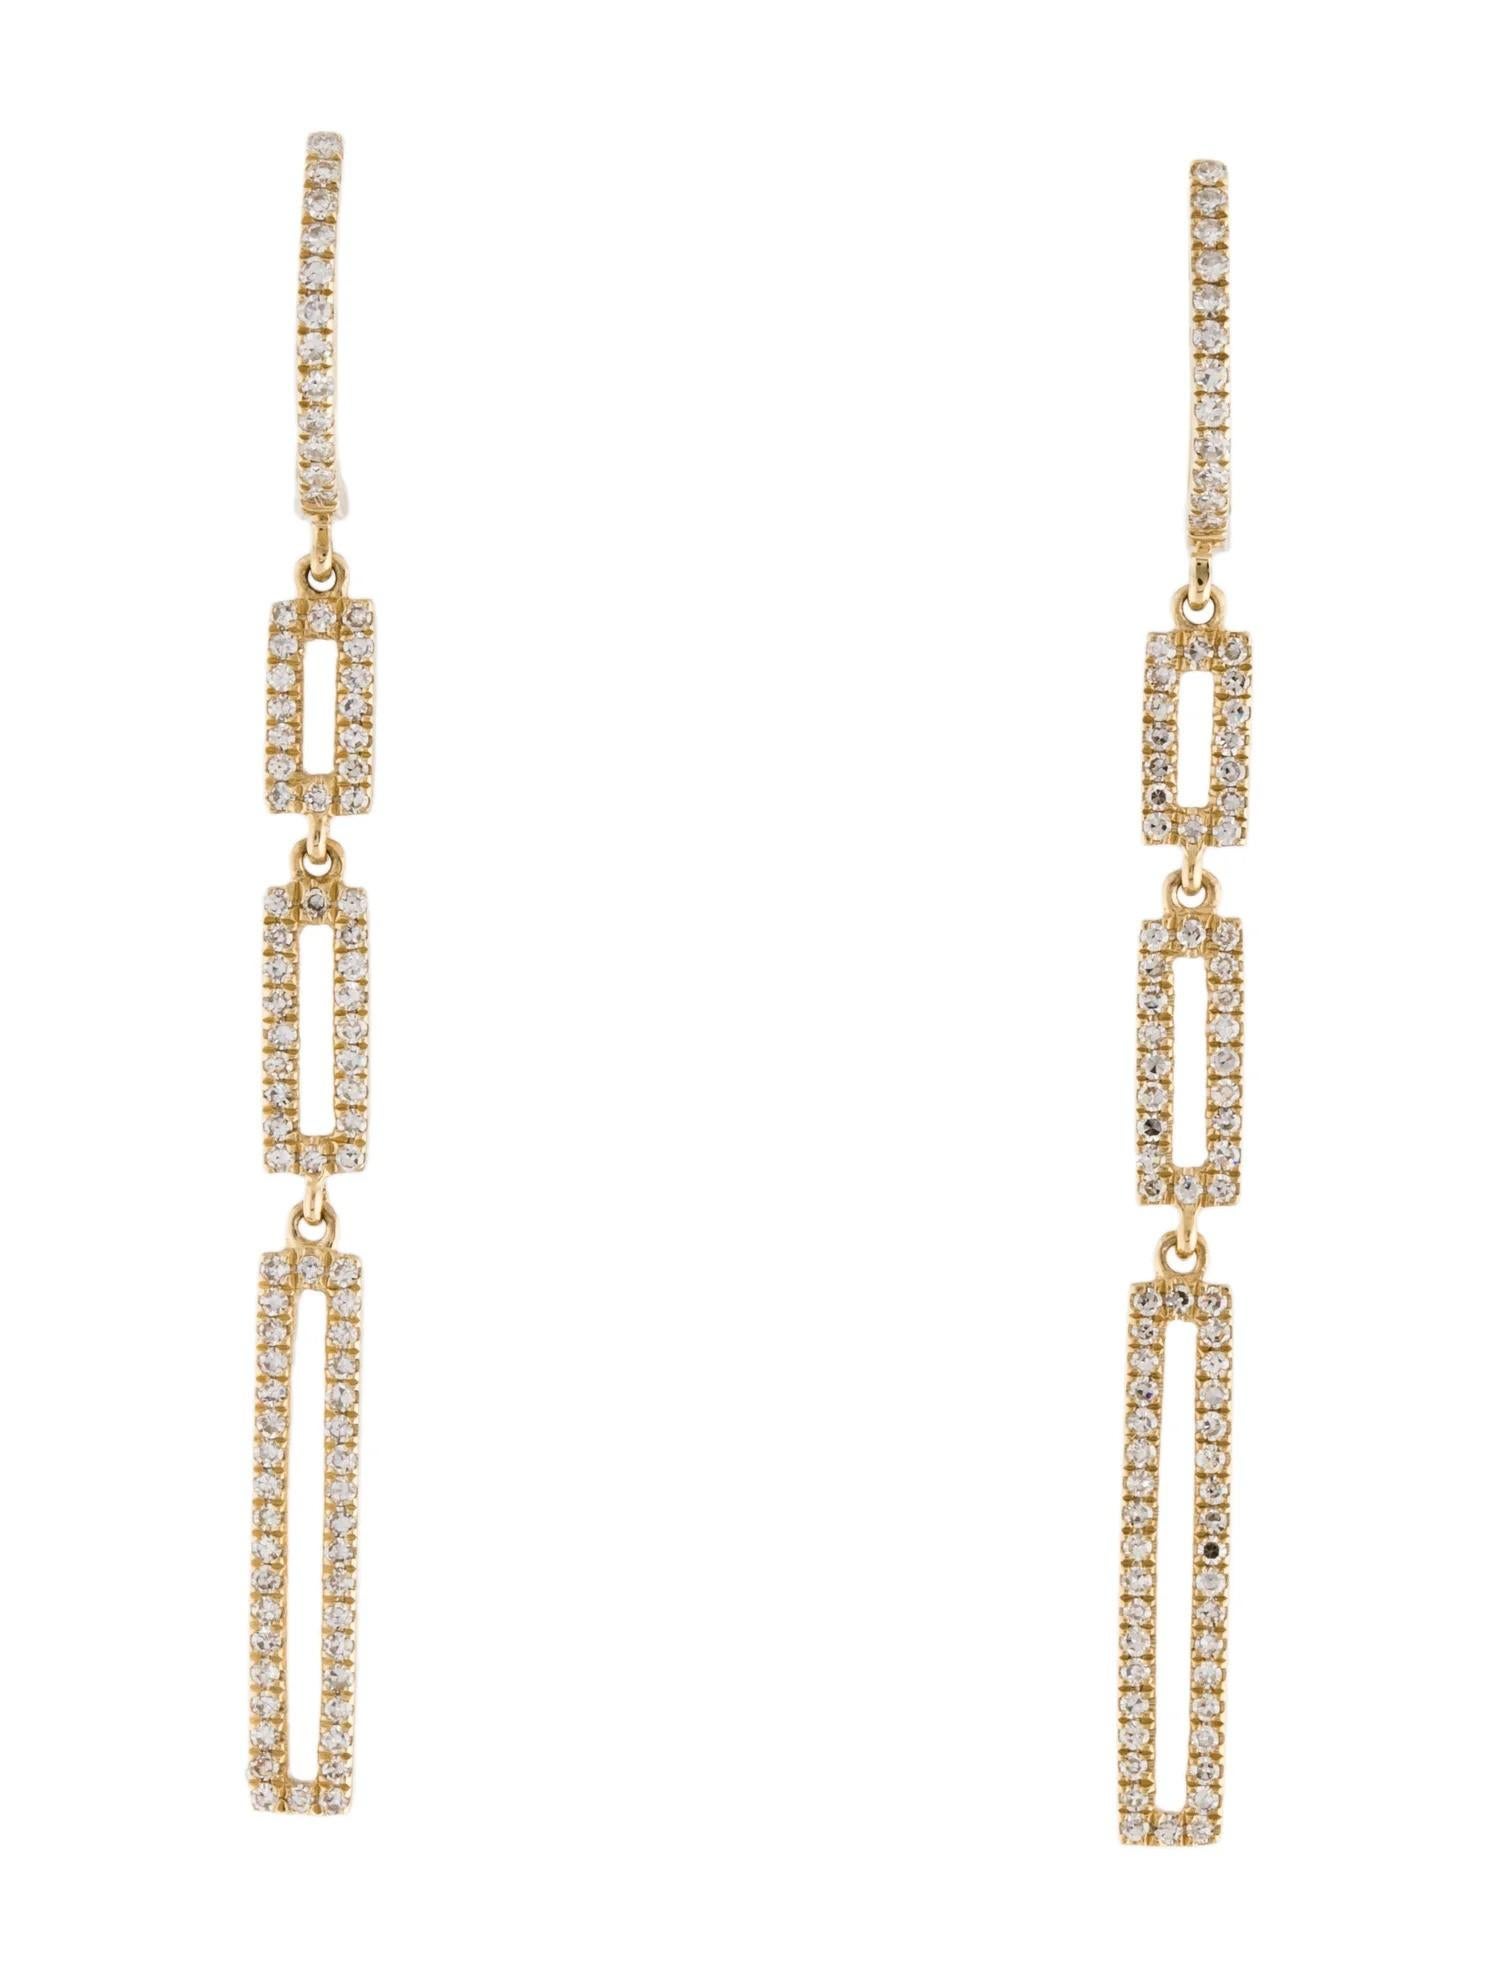 0.41 Carat Diamond Drop Link Yellow Gold Earrings  In New Condition For Sale In Great Neck, NY